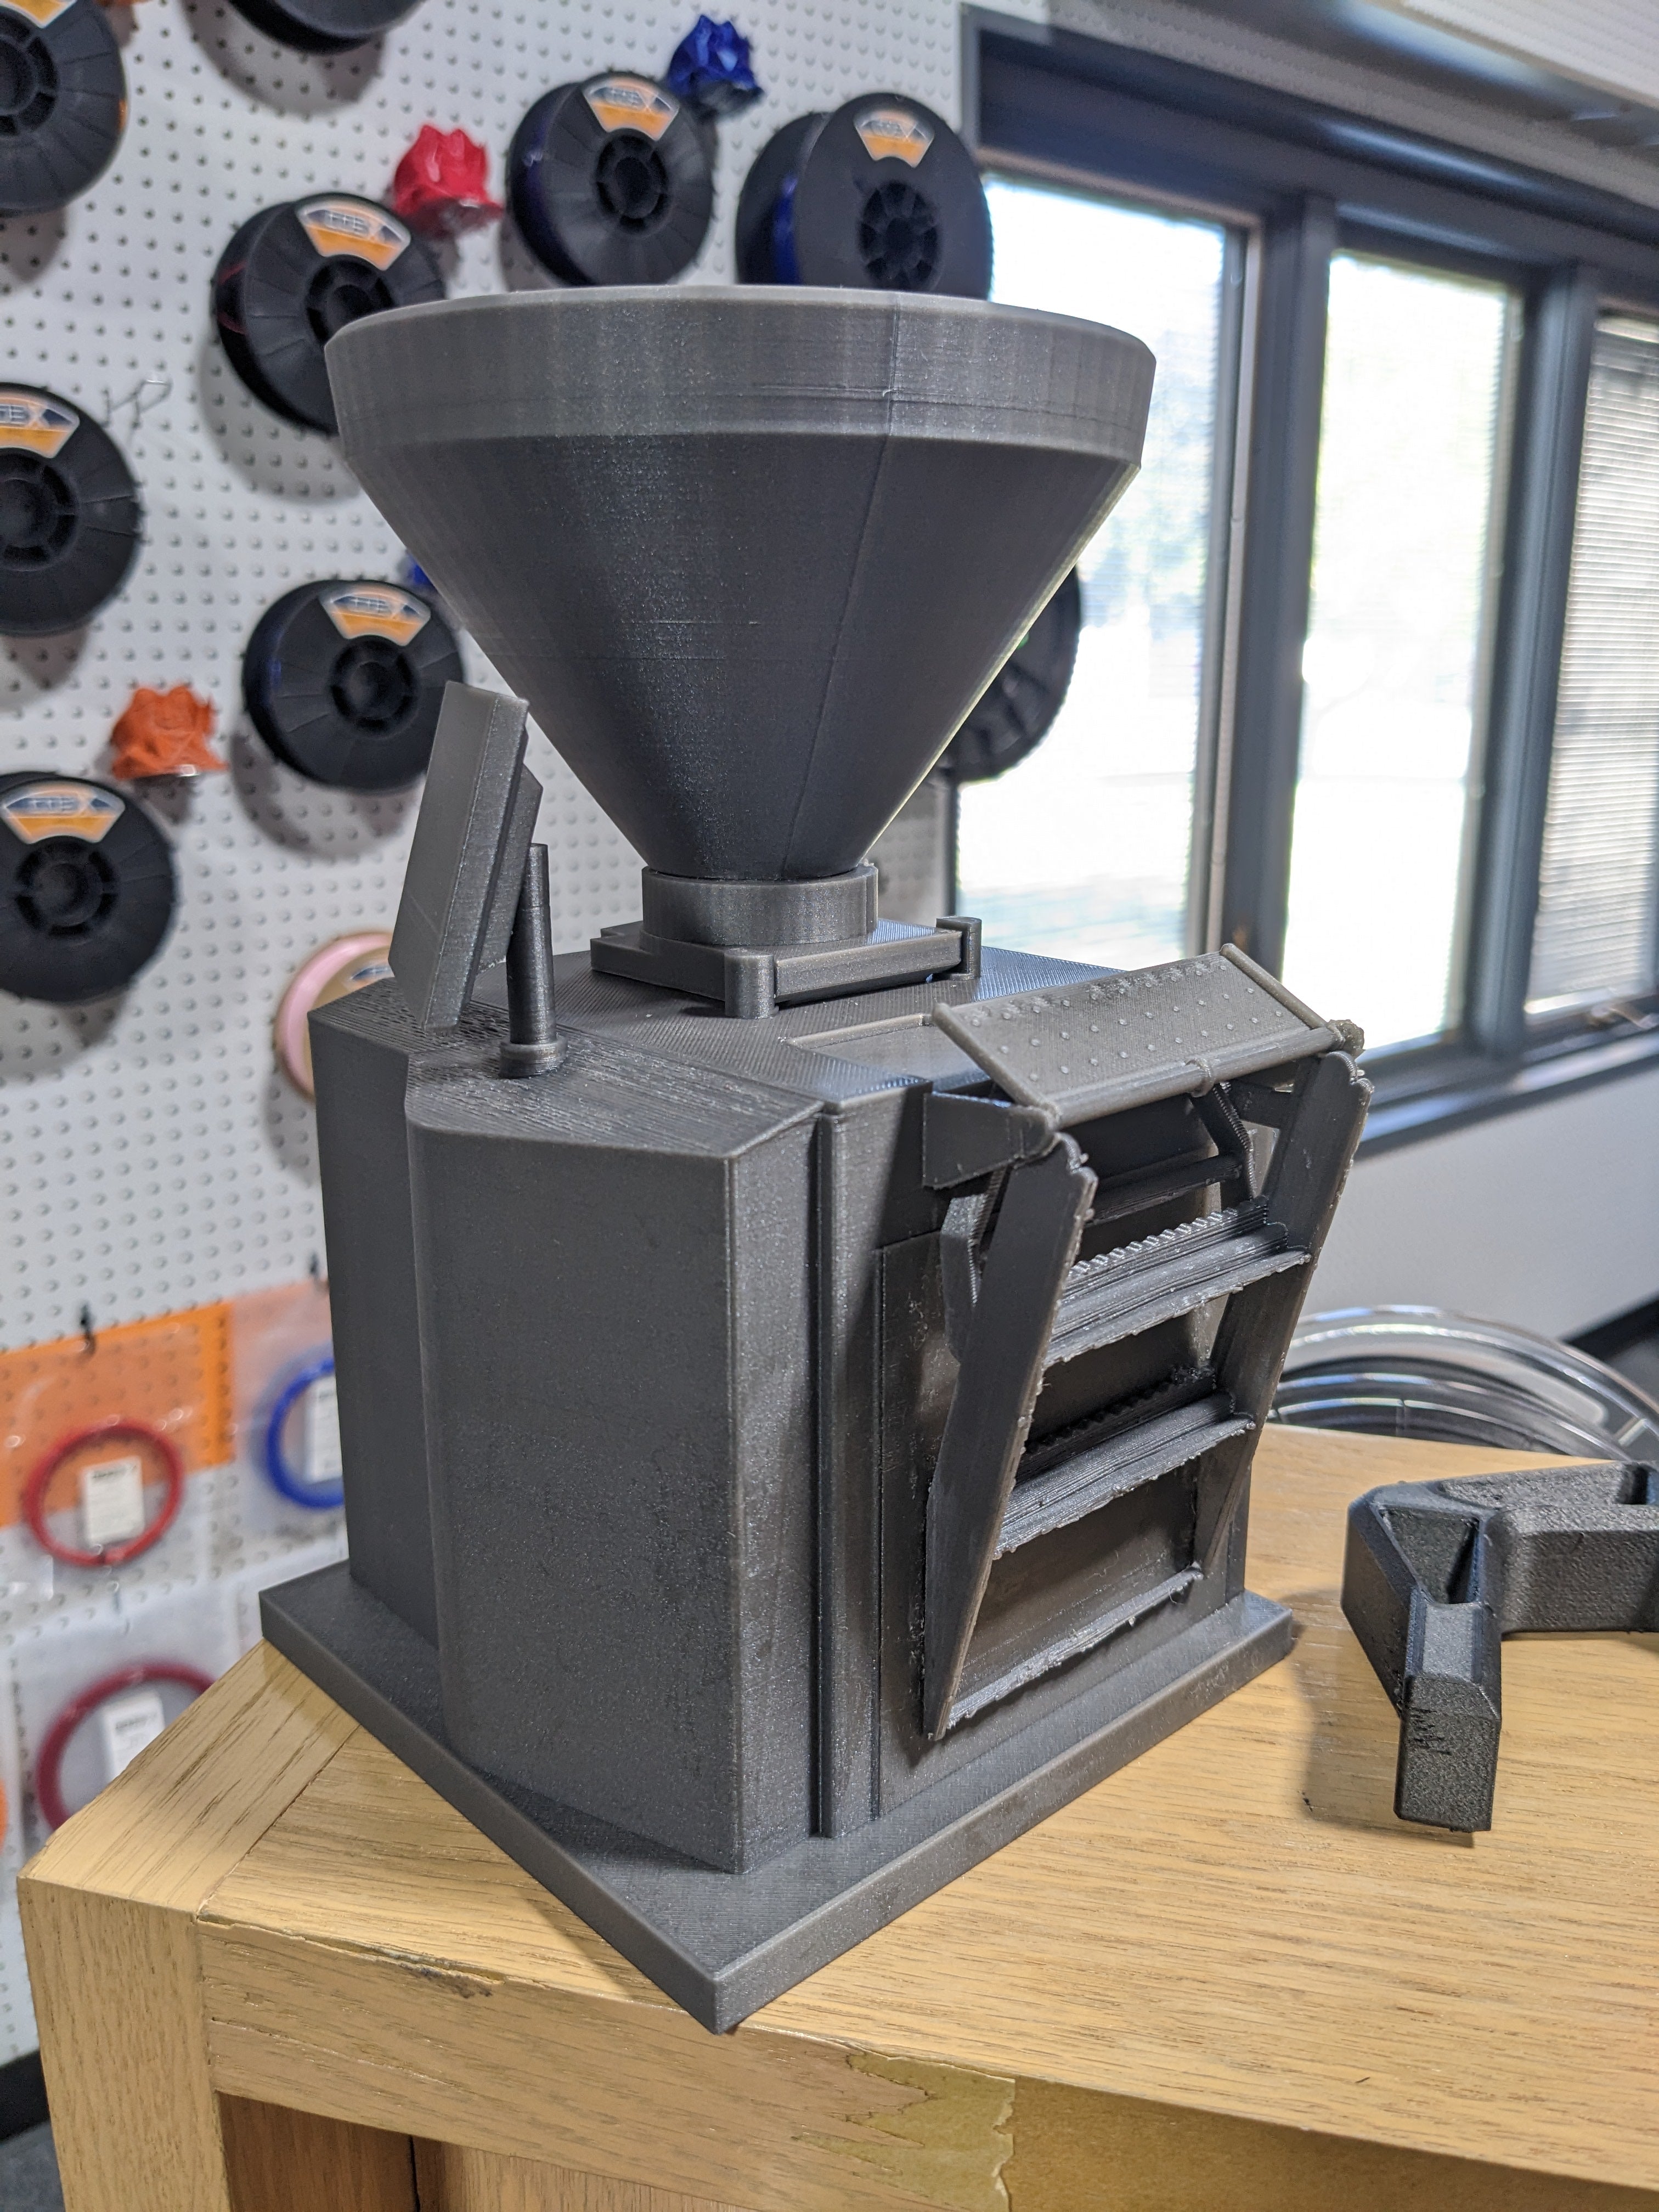 A small 3D printed model of a food processing machine